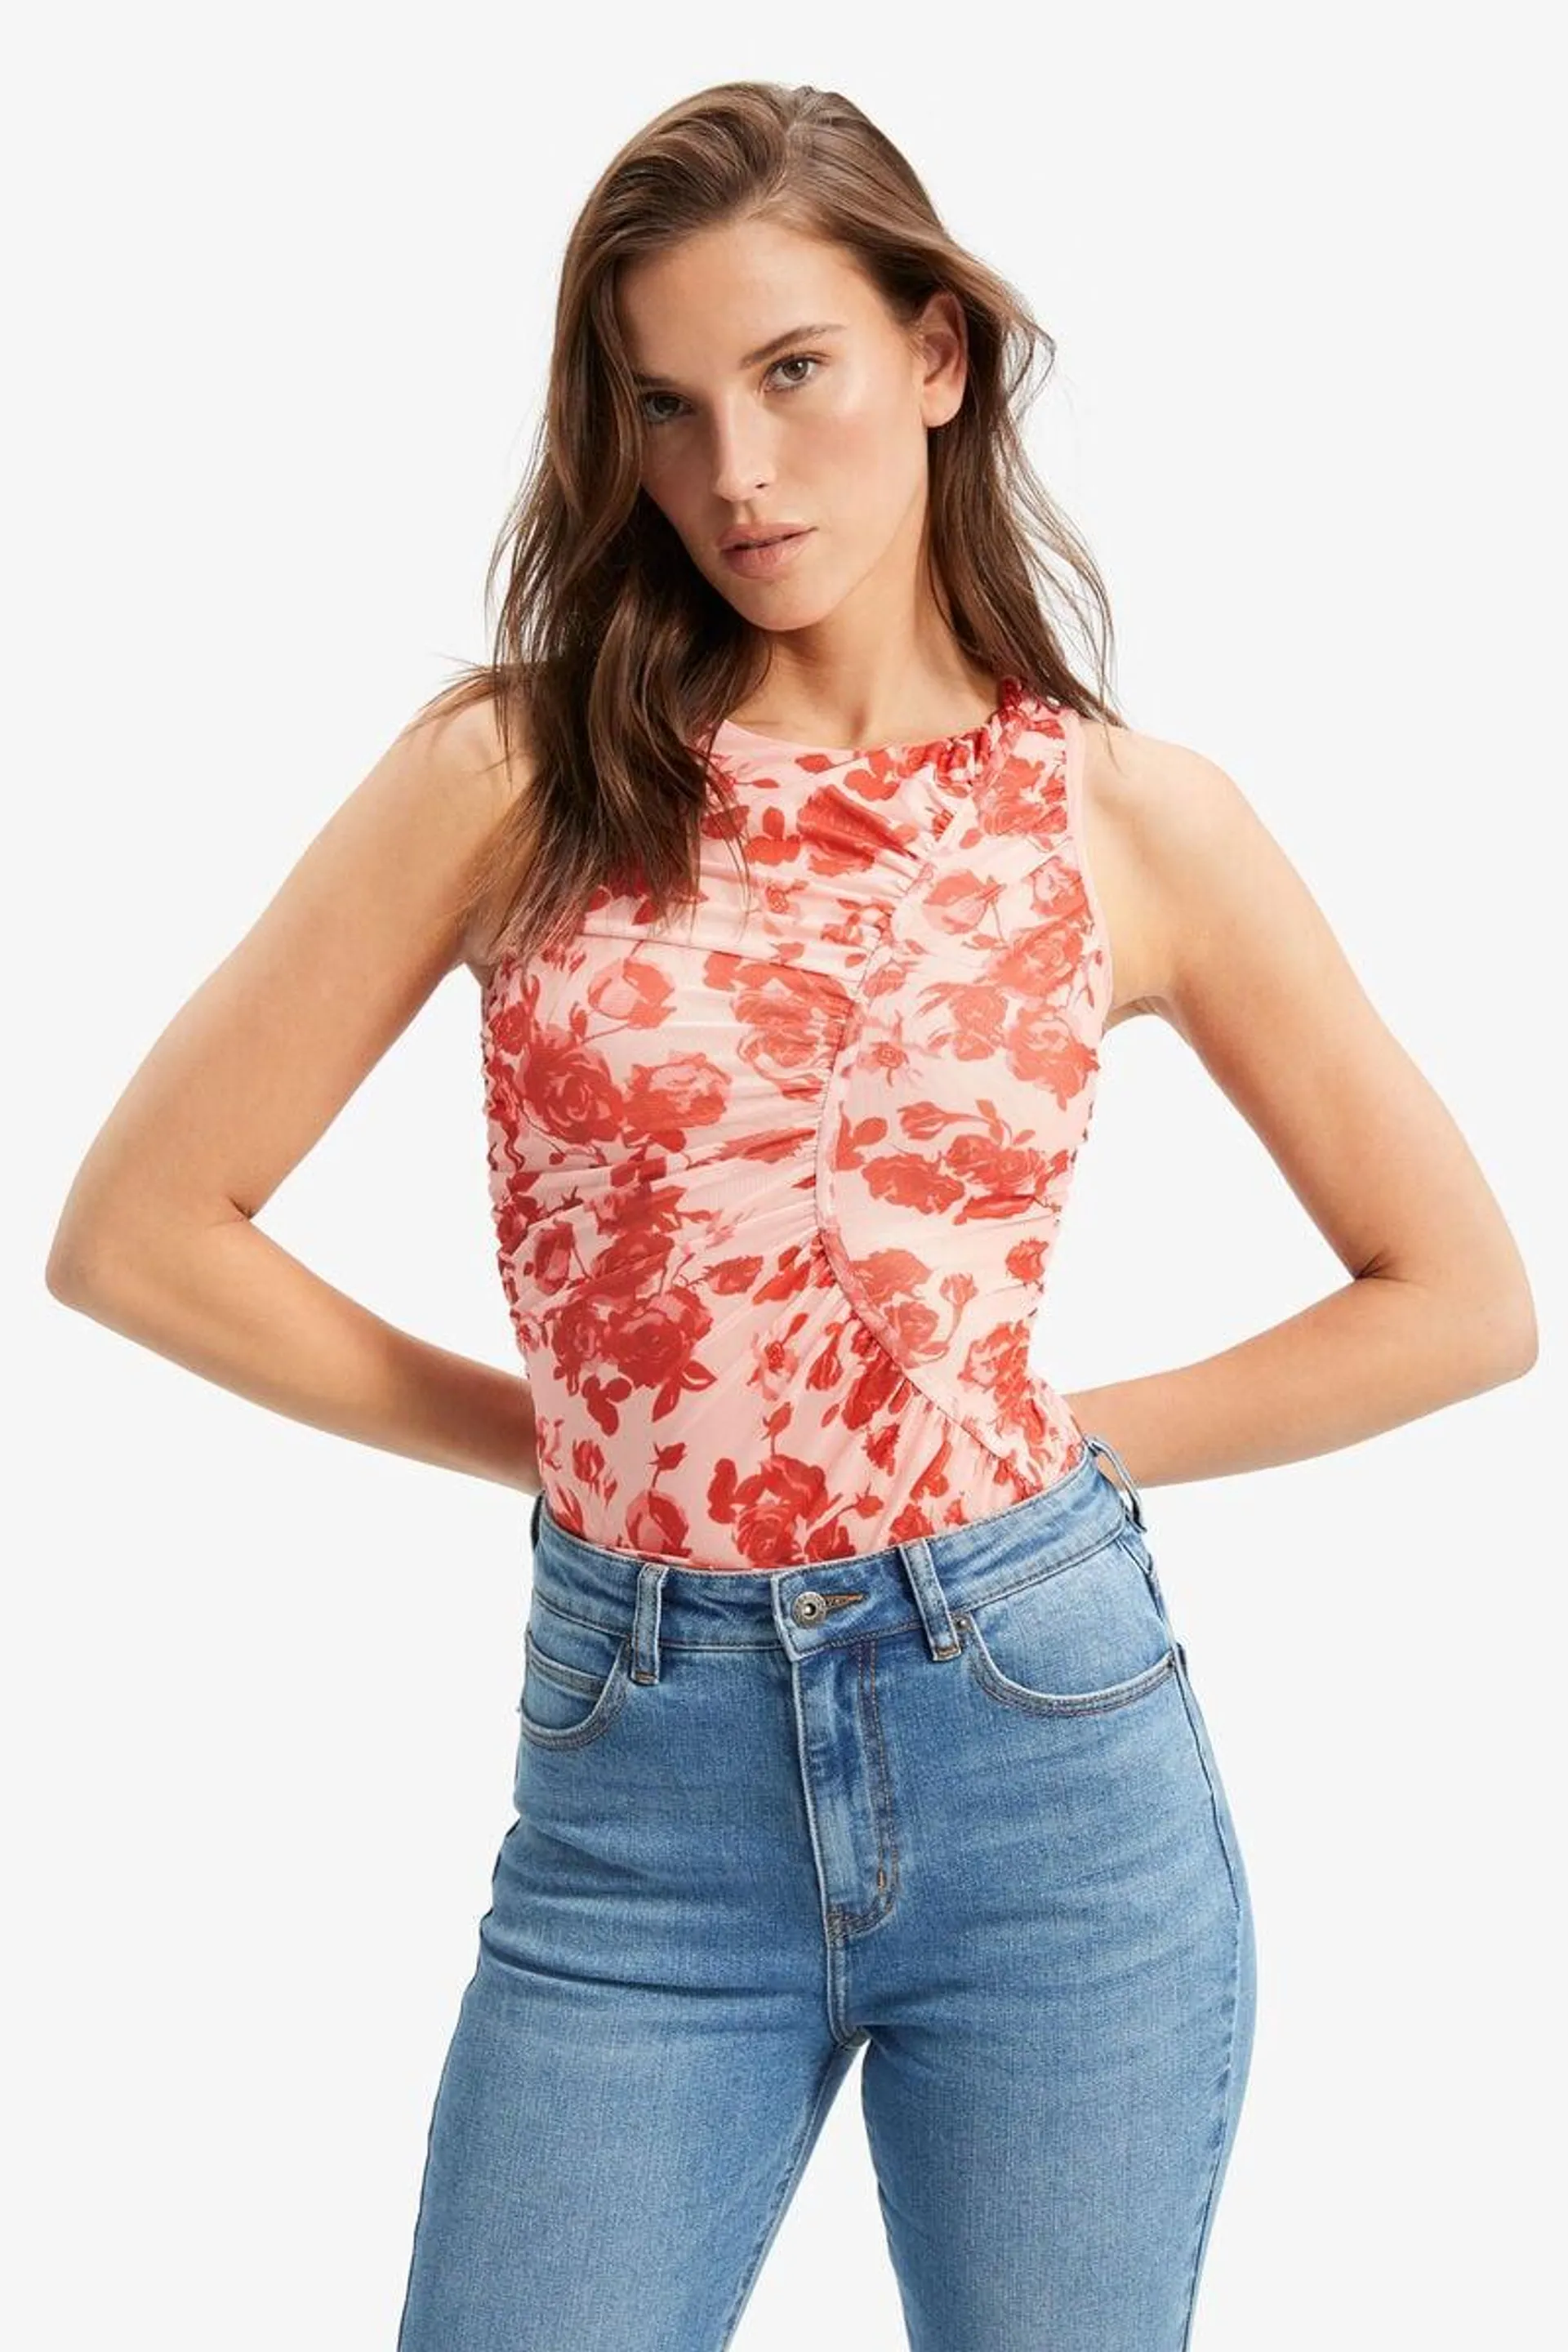 felicia mesh top in red floral